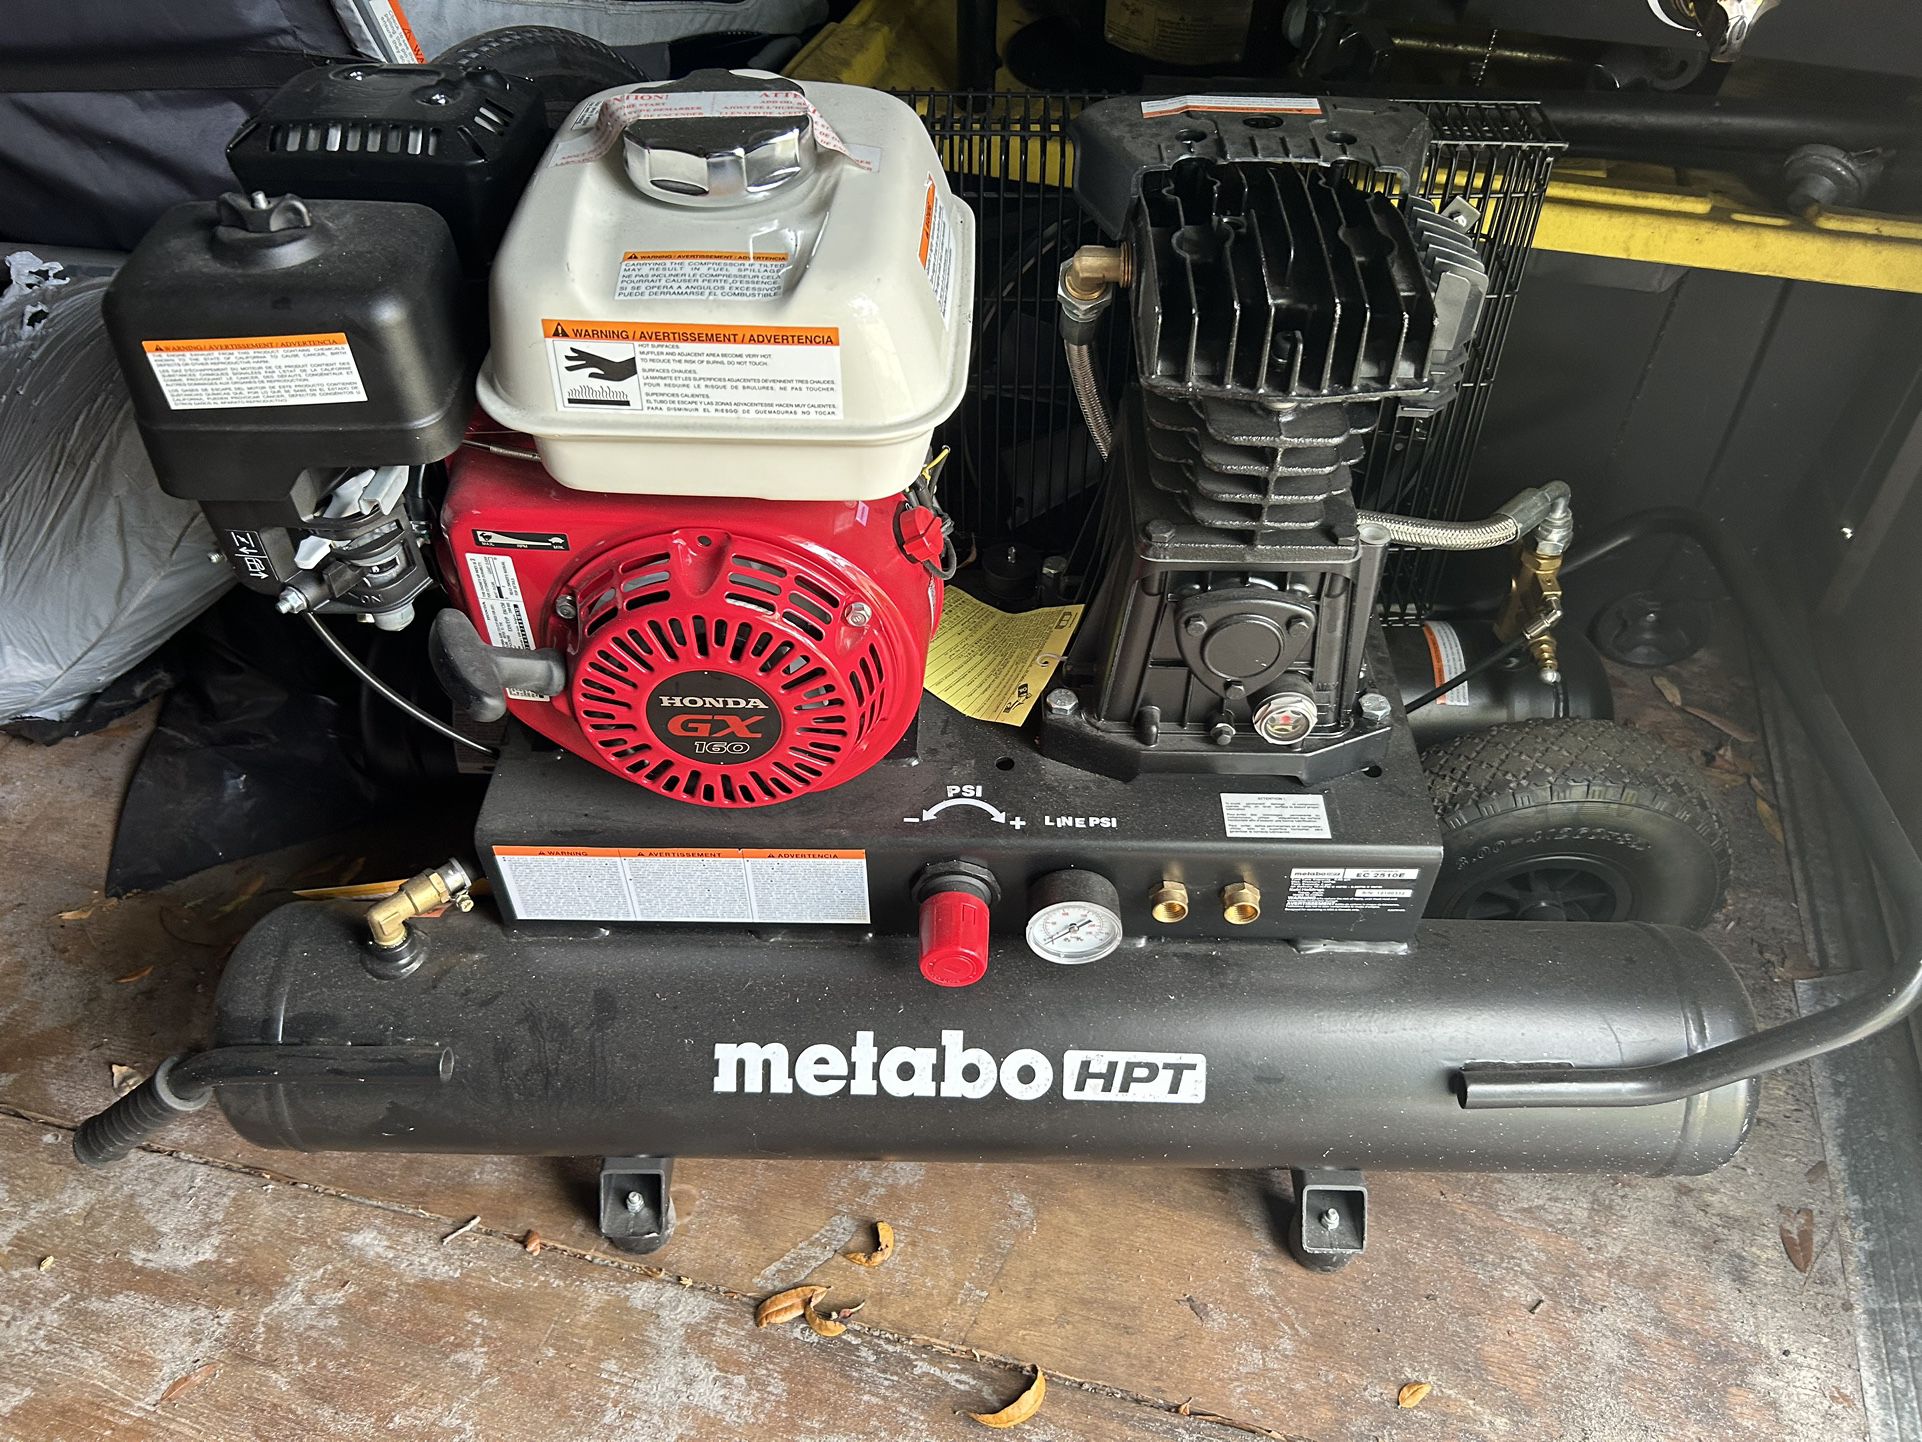 New Metabo Gas Compressor 